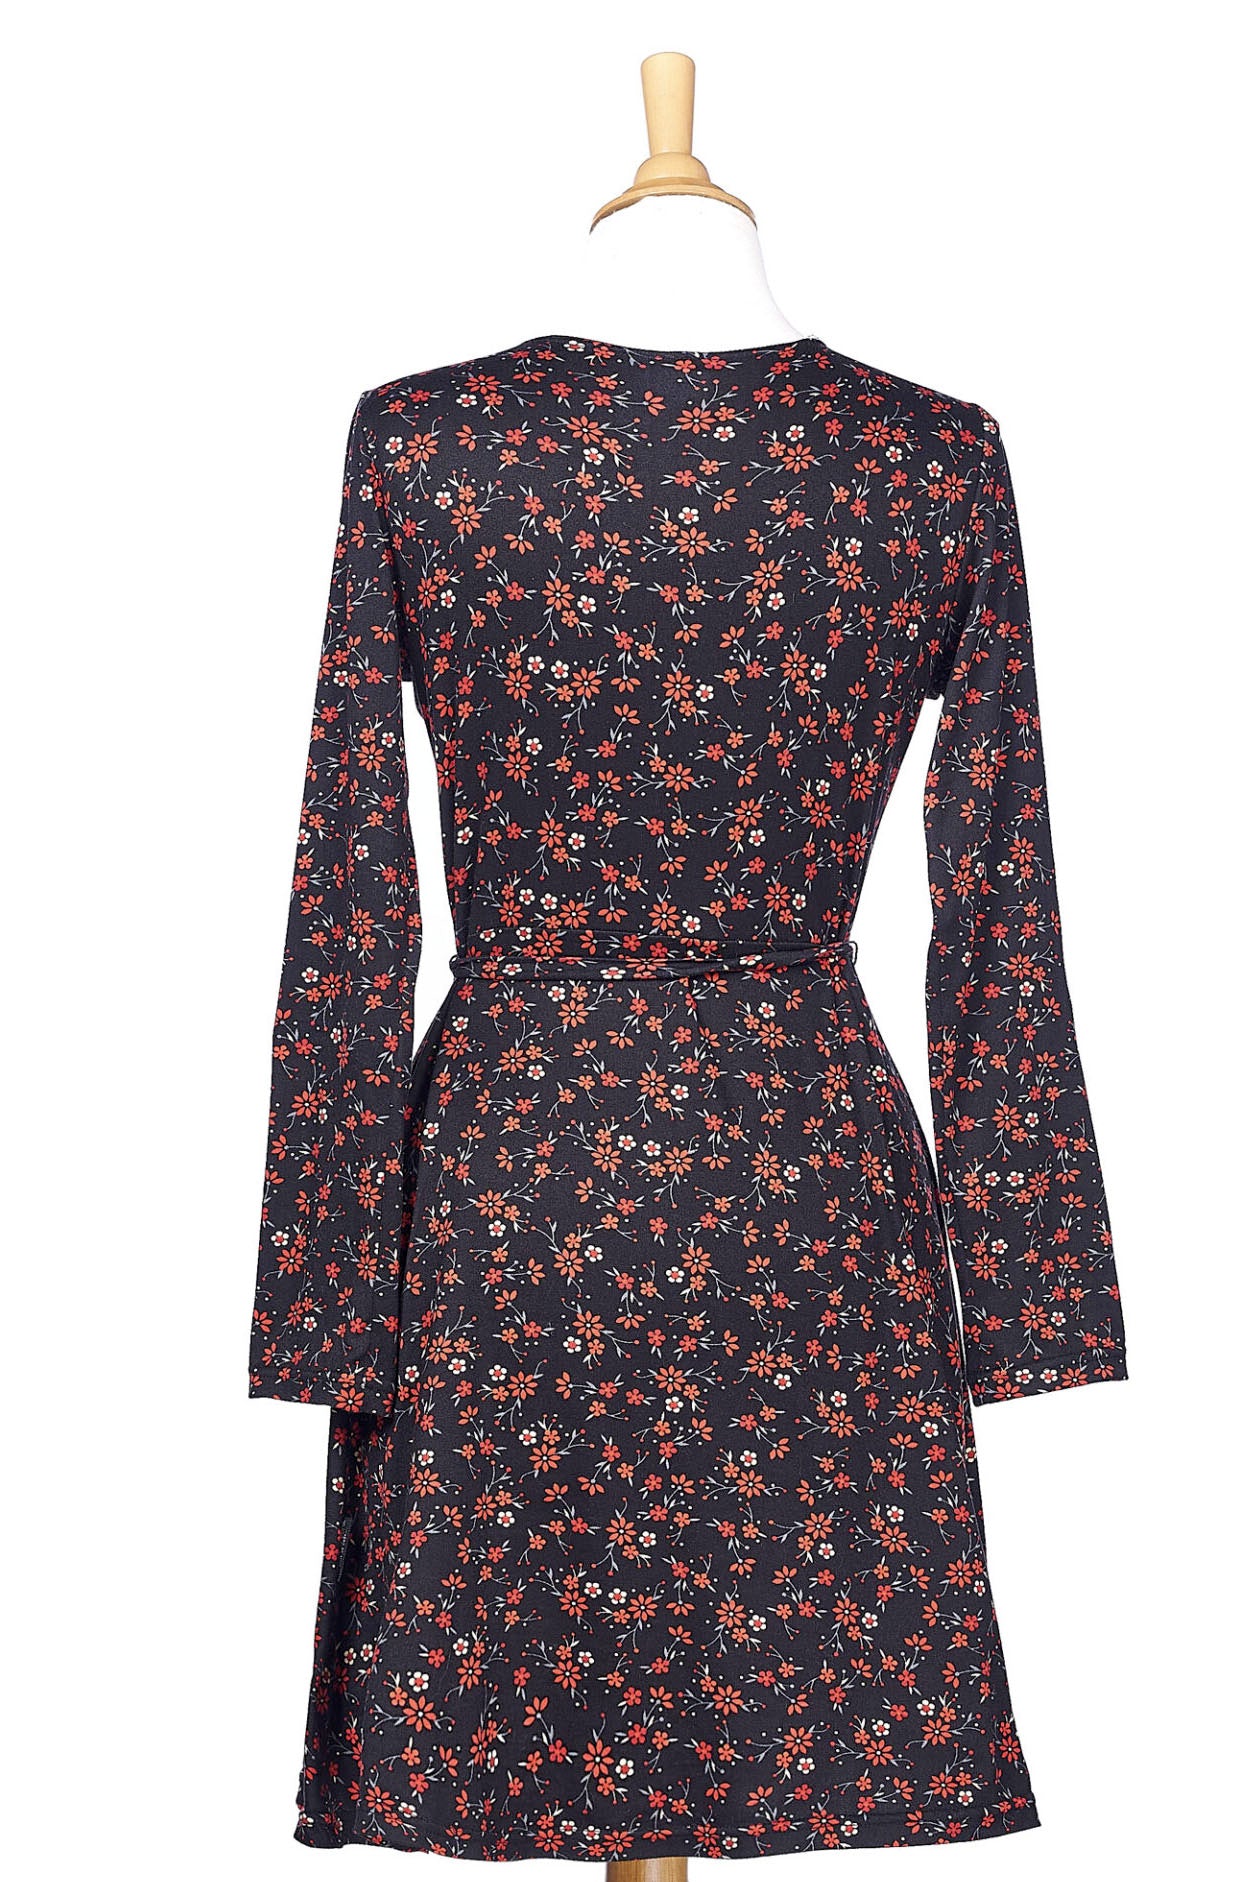 Ste-Anne Dress by Rien ne se Perd, Red, back view, floral, faux-wrap dress, tie belt, pleats at shoulders, fit and flare, sizes XS to XXL, made in Quebec